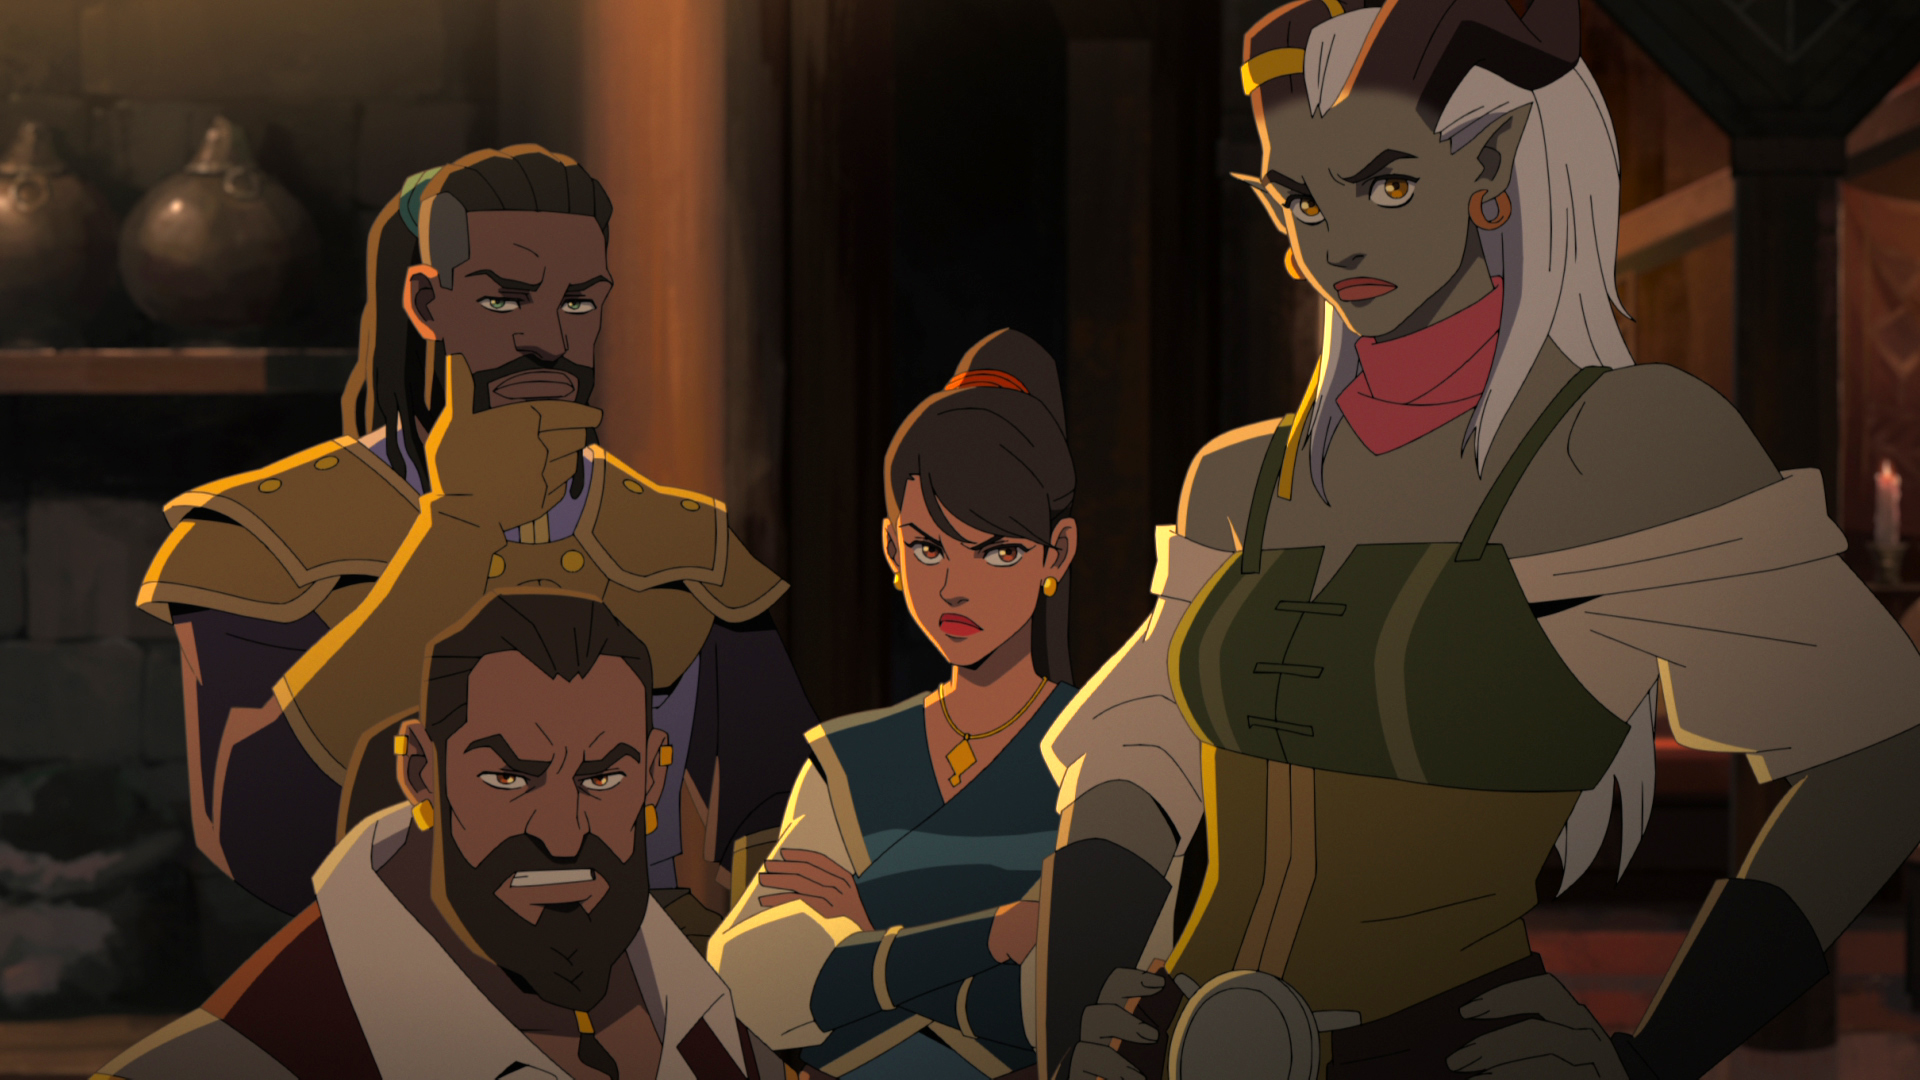 Dragon Age: Absolution is a new anime on Netflix - The Verge